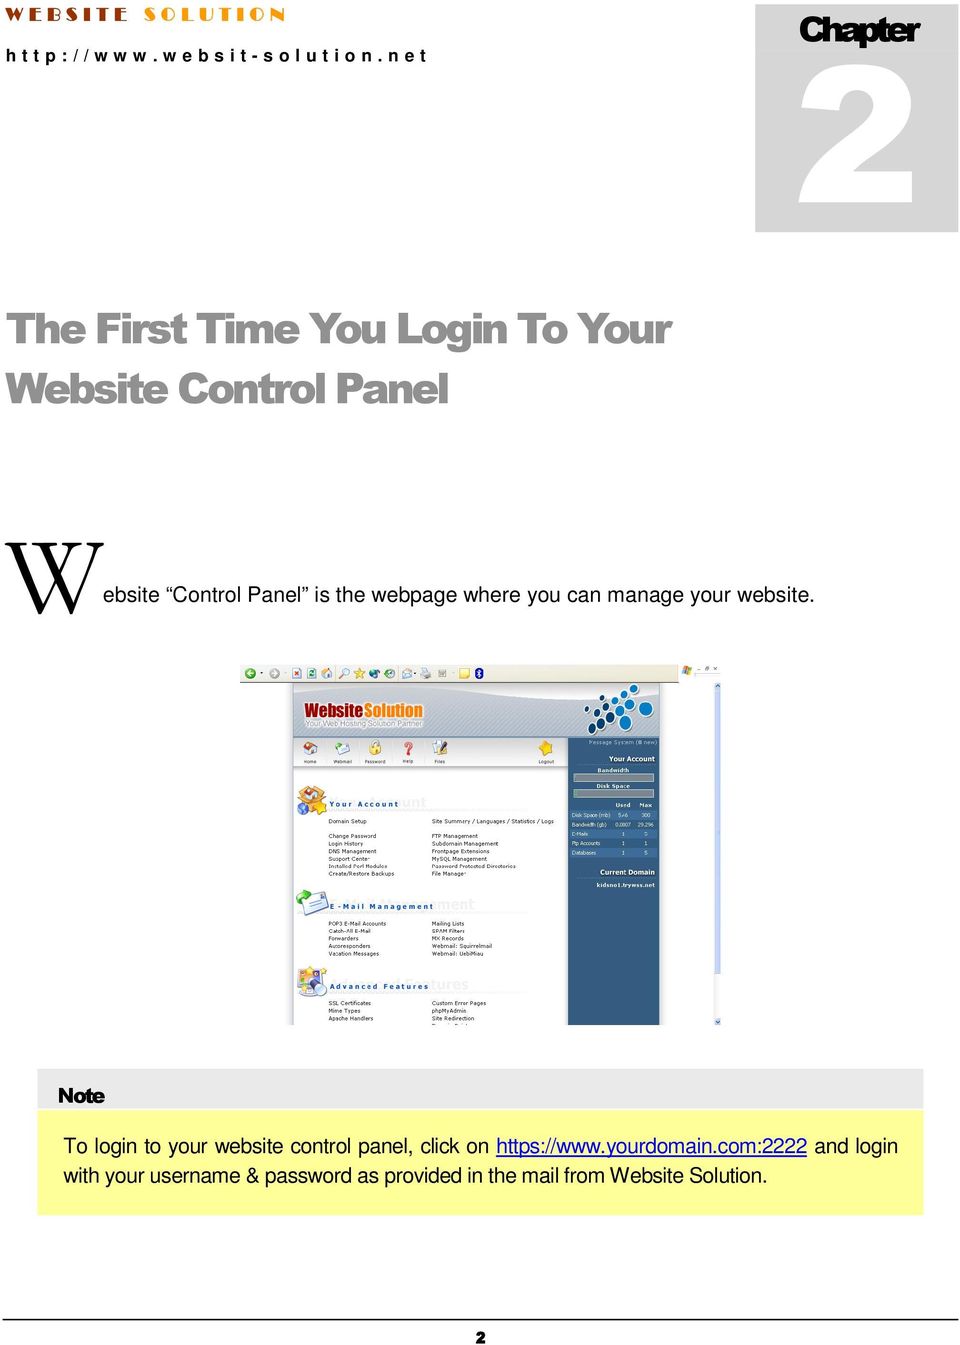 To login to your website control panel, click on